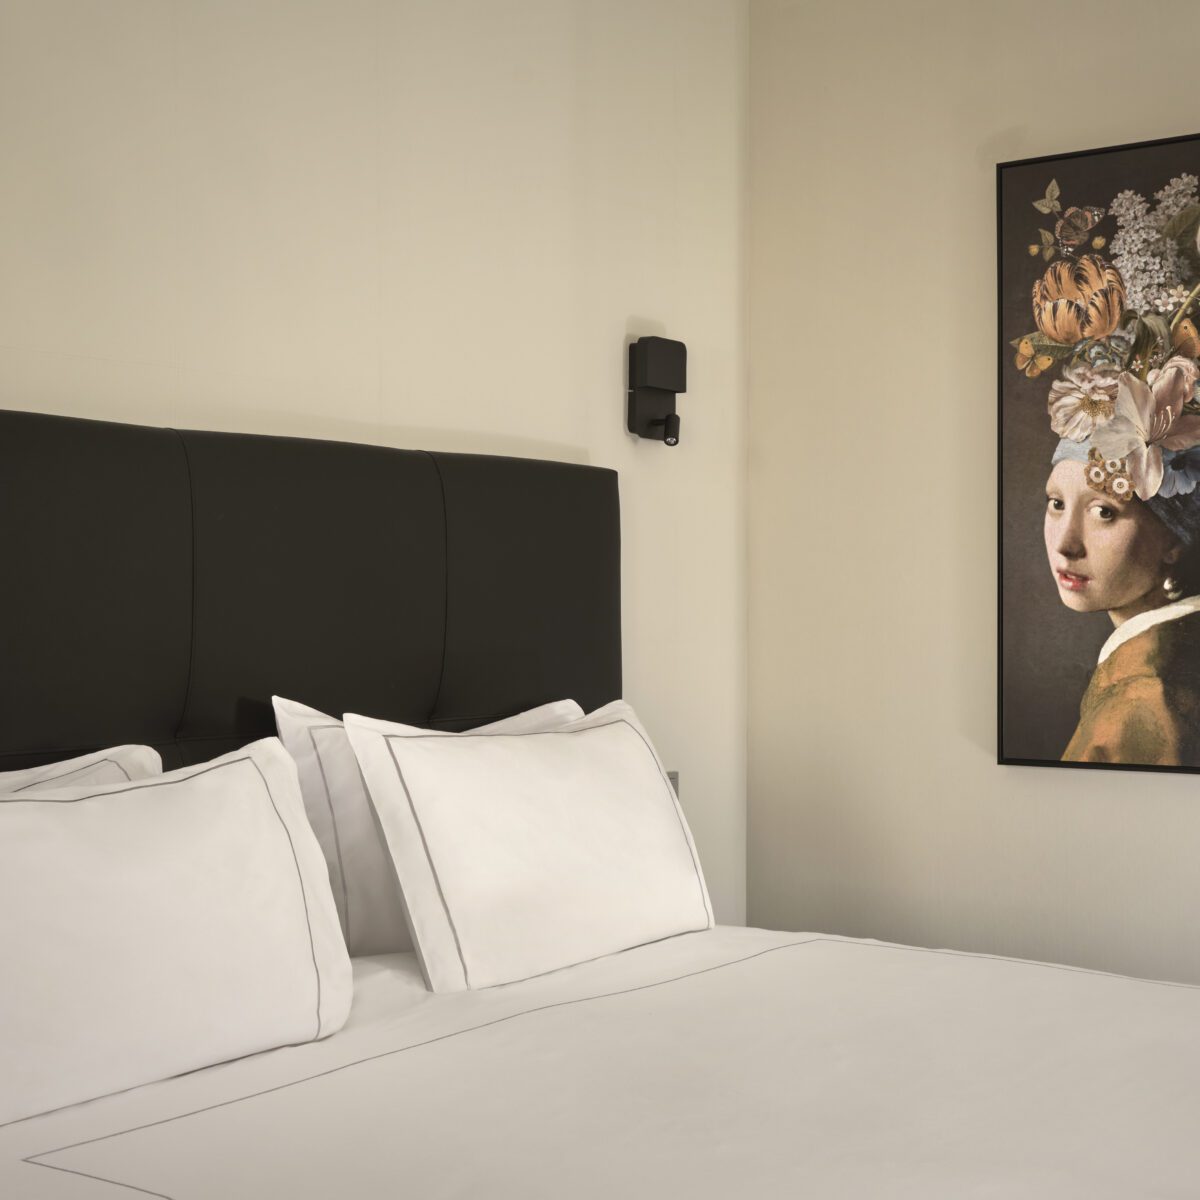 Park Plaza Eindhoven superior queen room bedding and artwork